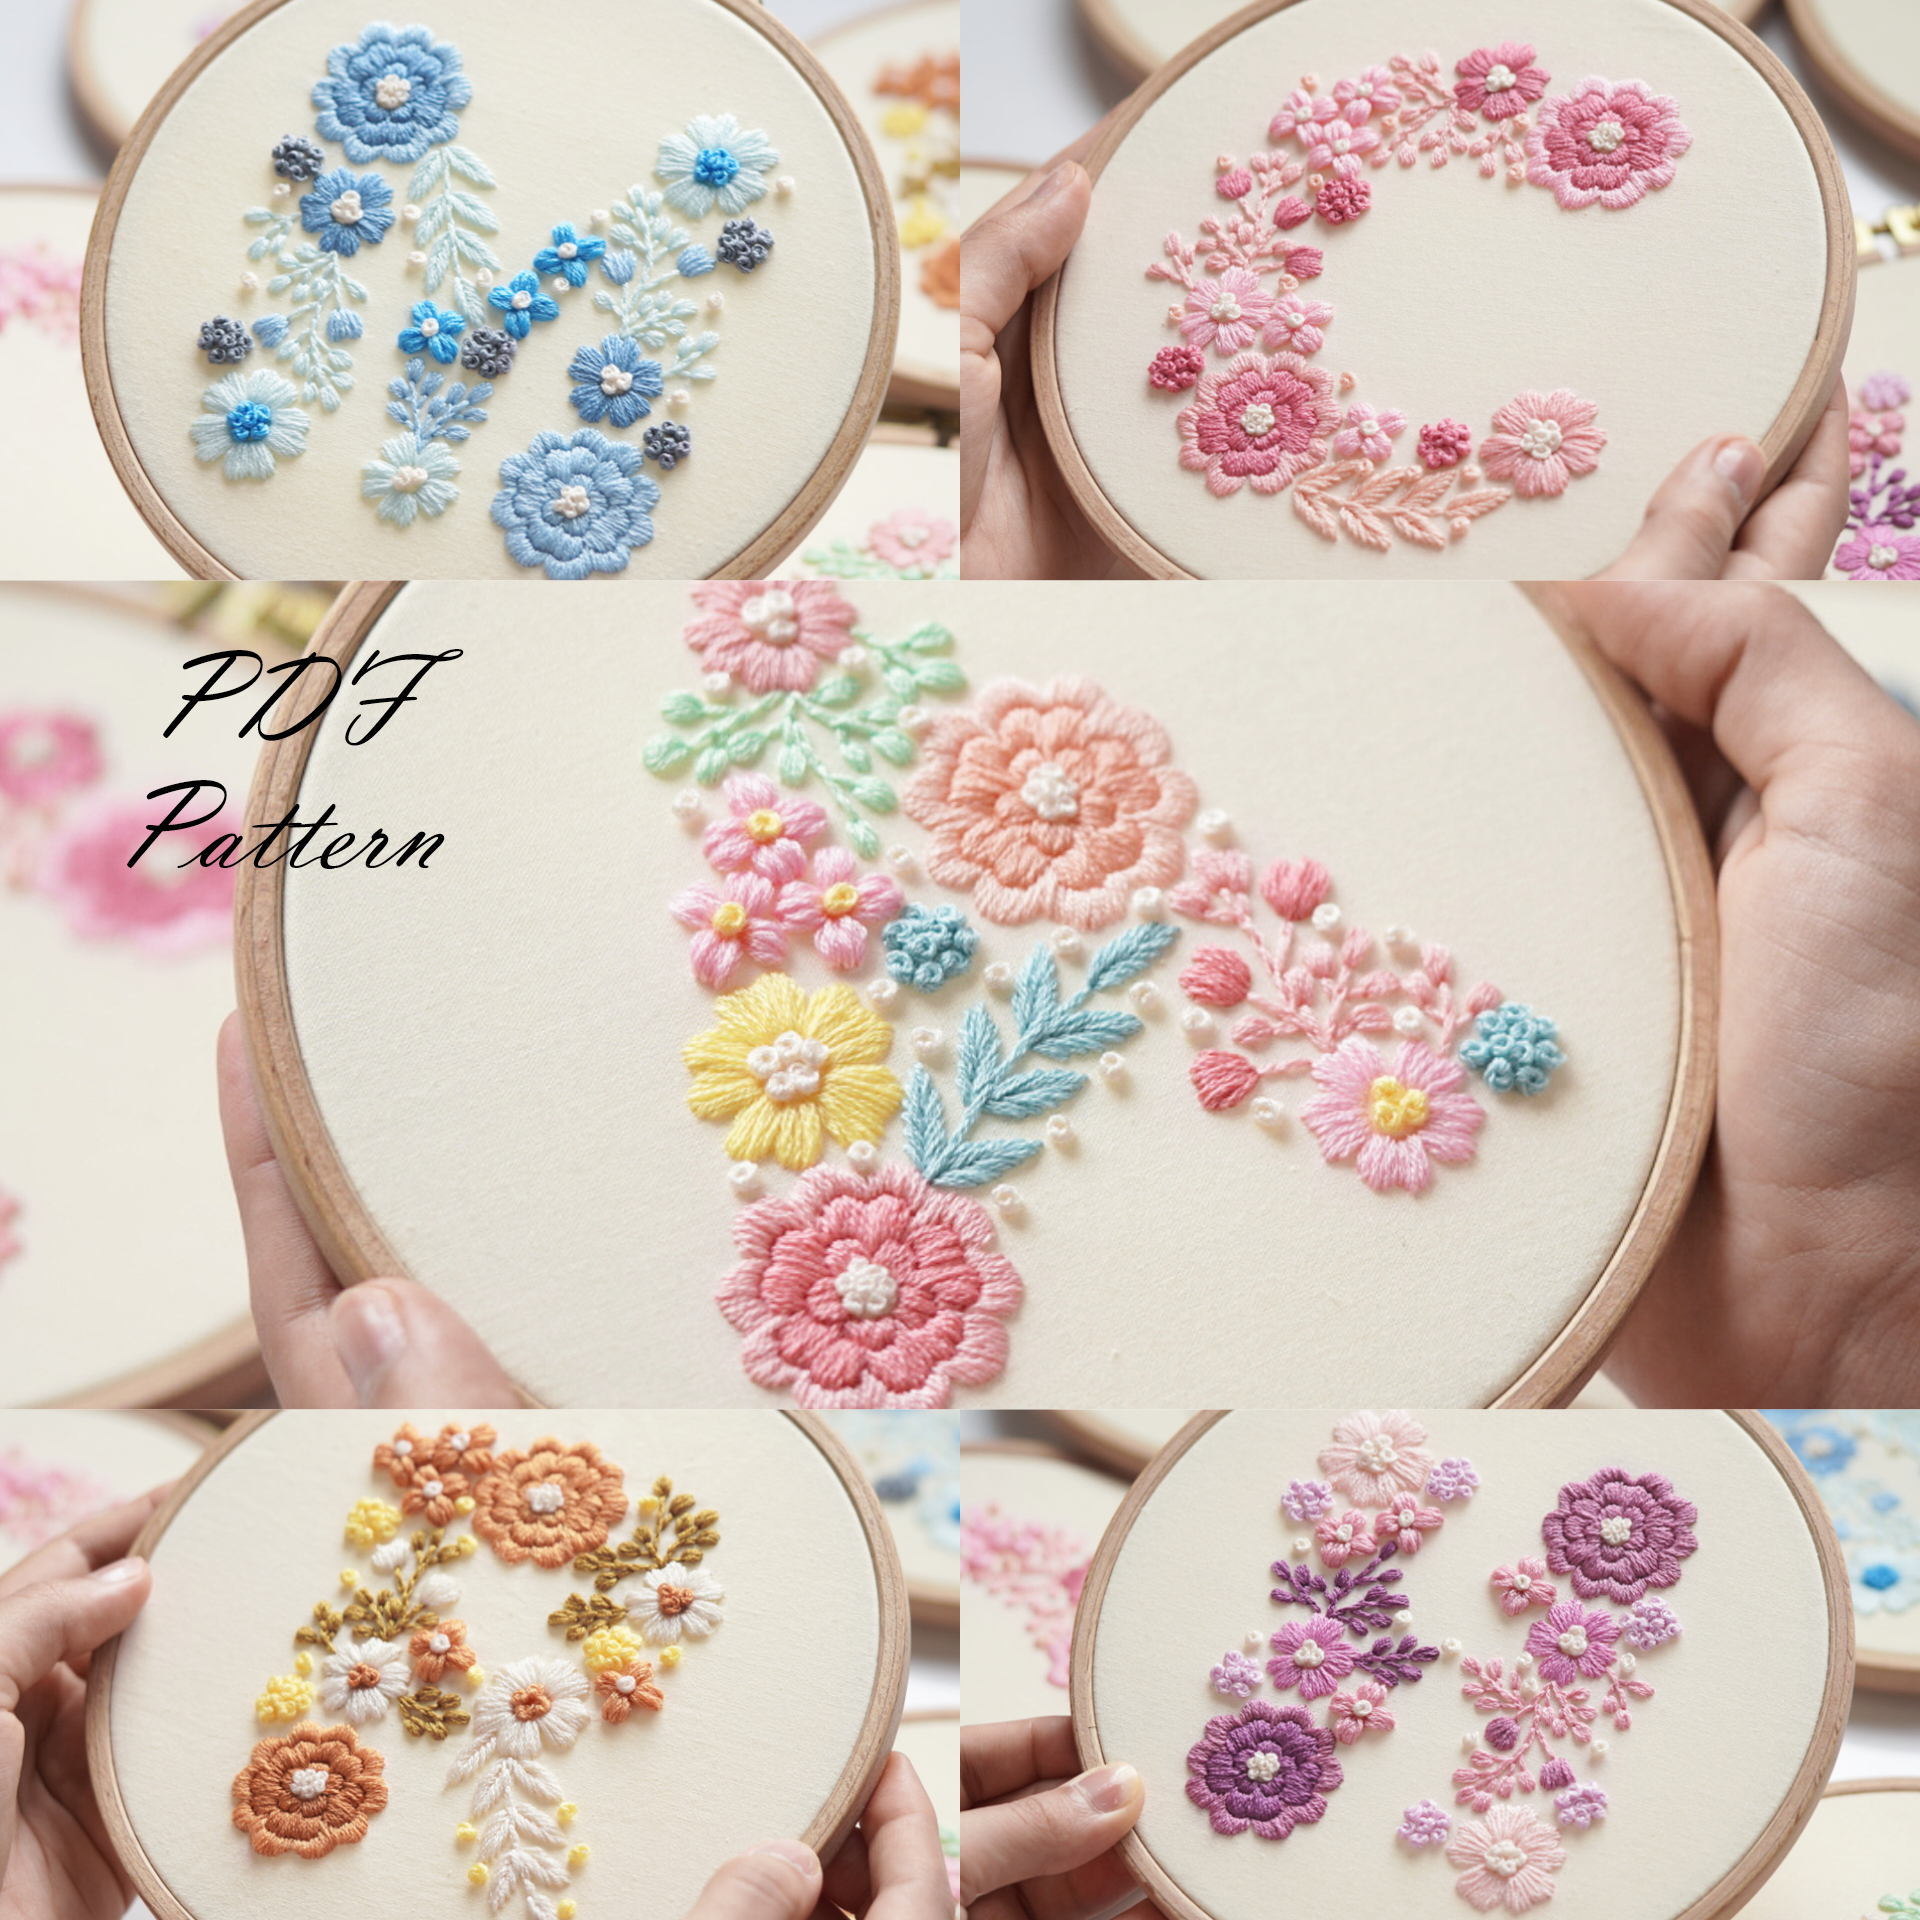 Floral alphabet embroidery